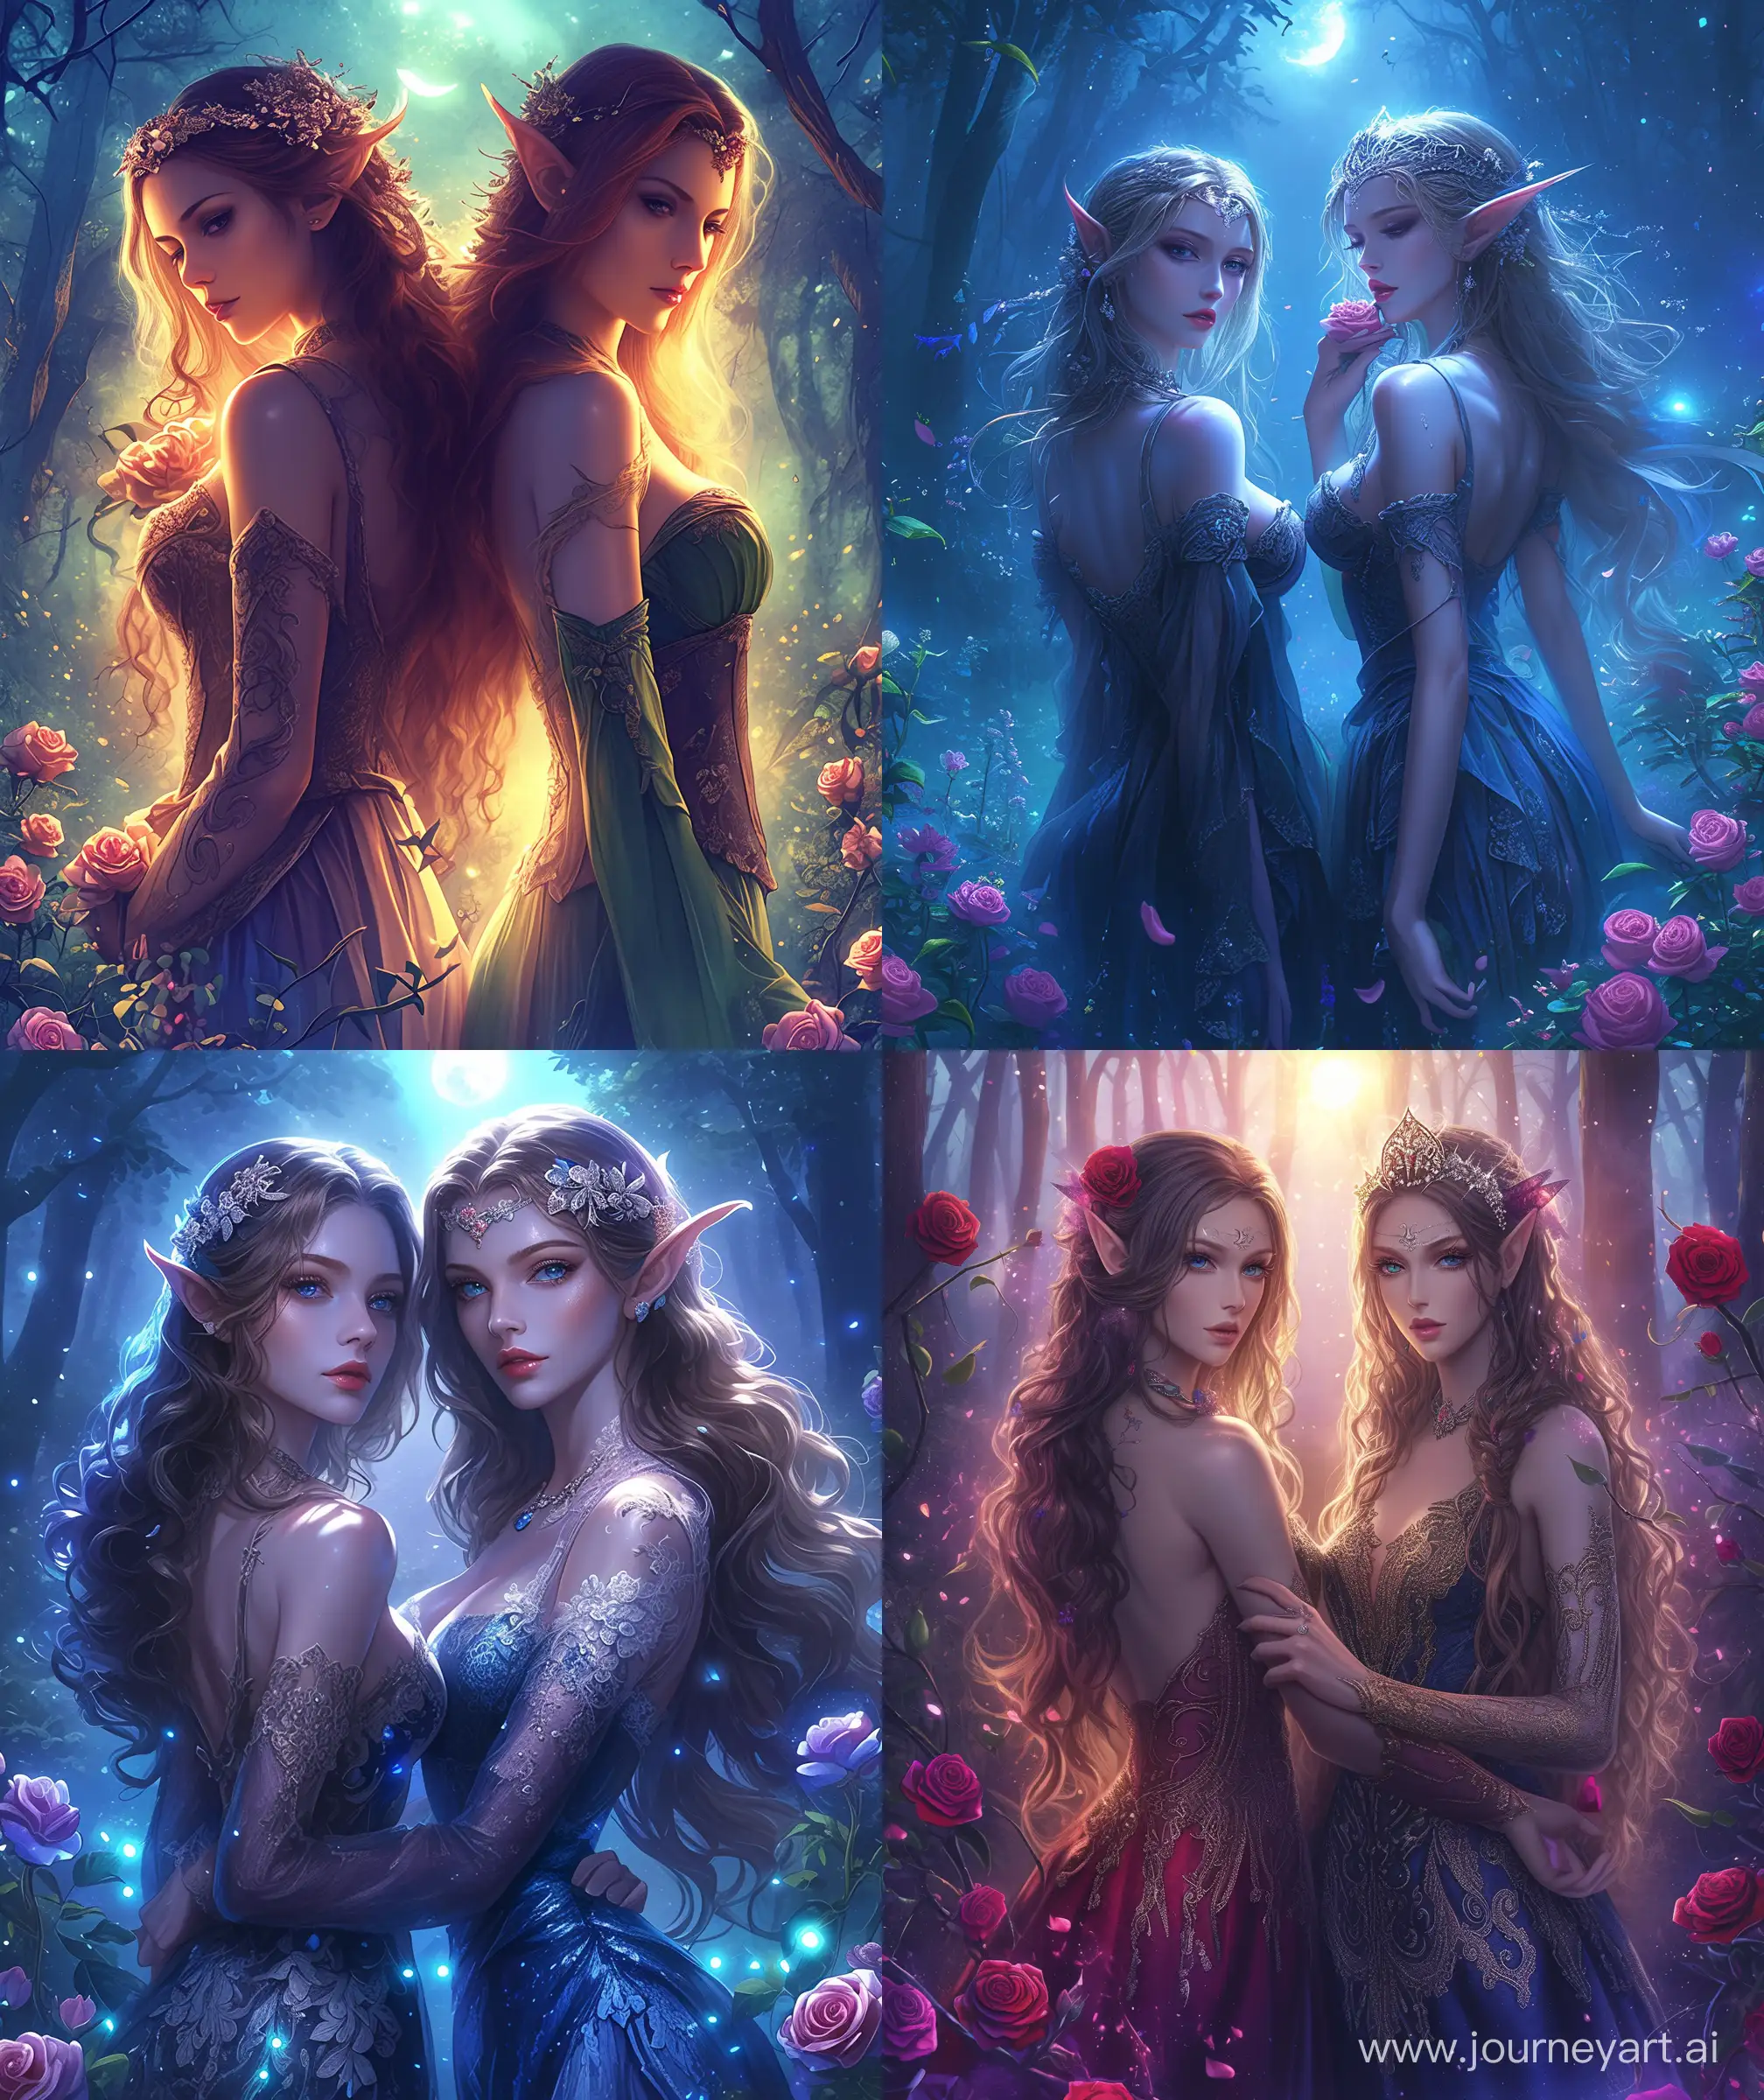 Enchanting-Moonlit-Forest-Two-Elegant-Elven-Sisters-Amid-Roses-and-Magic